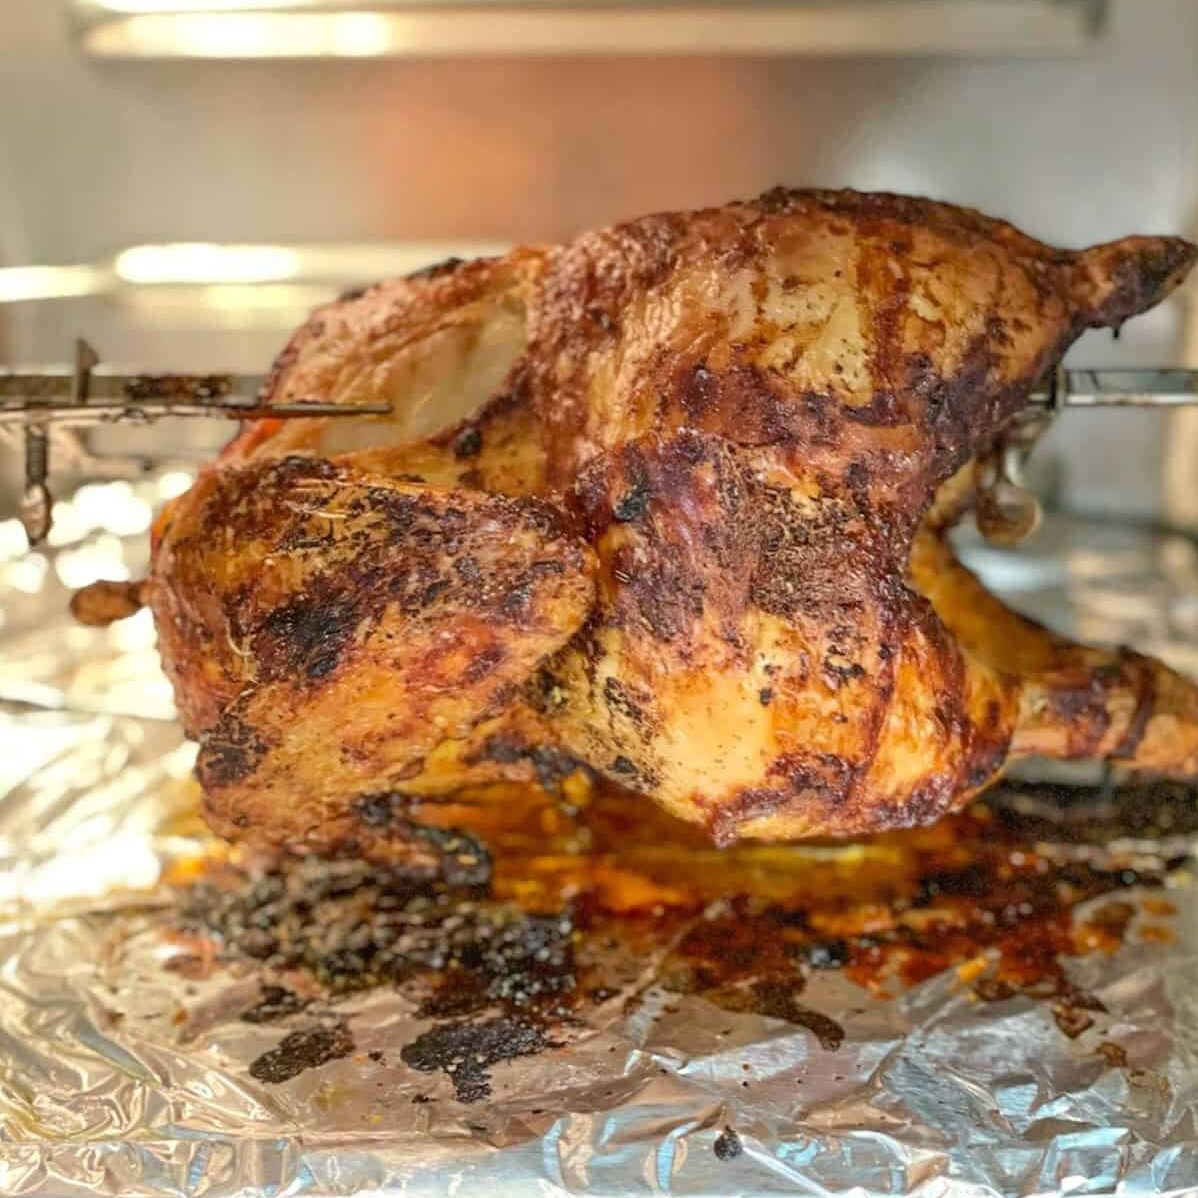 How to Make Rotisserie Chicken - From Michigan To The Table